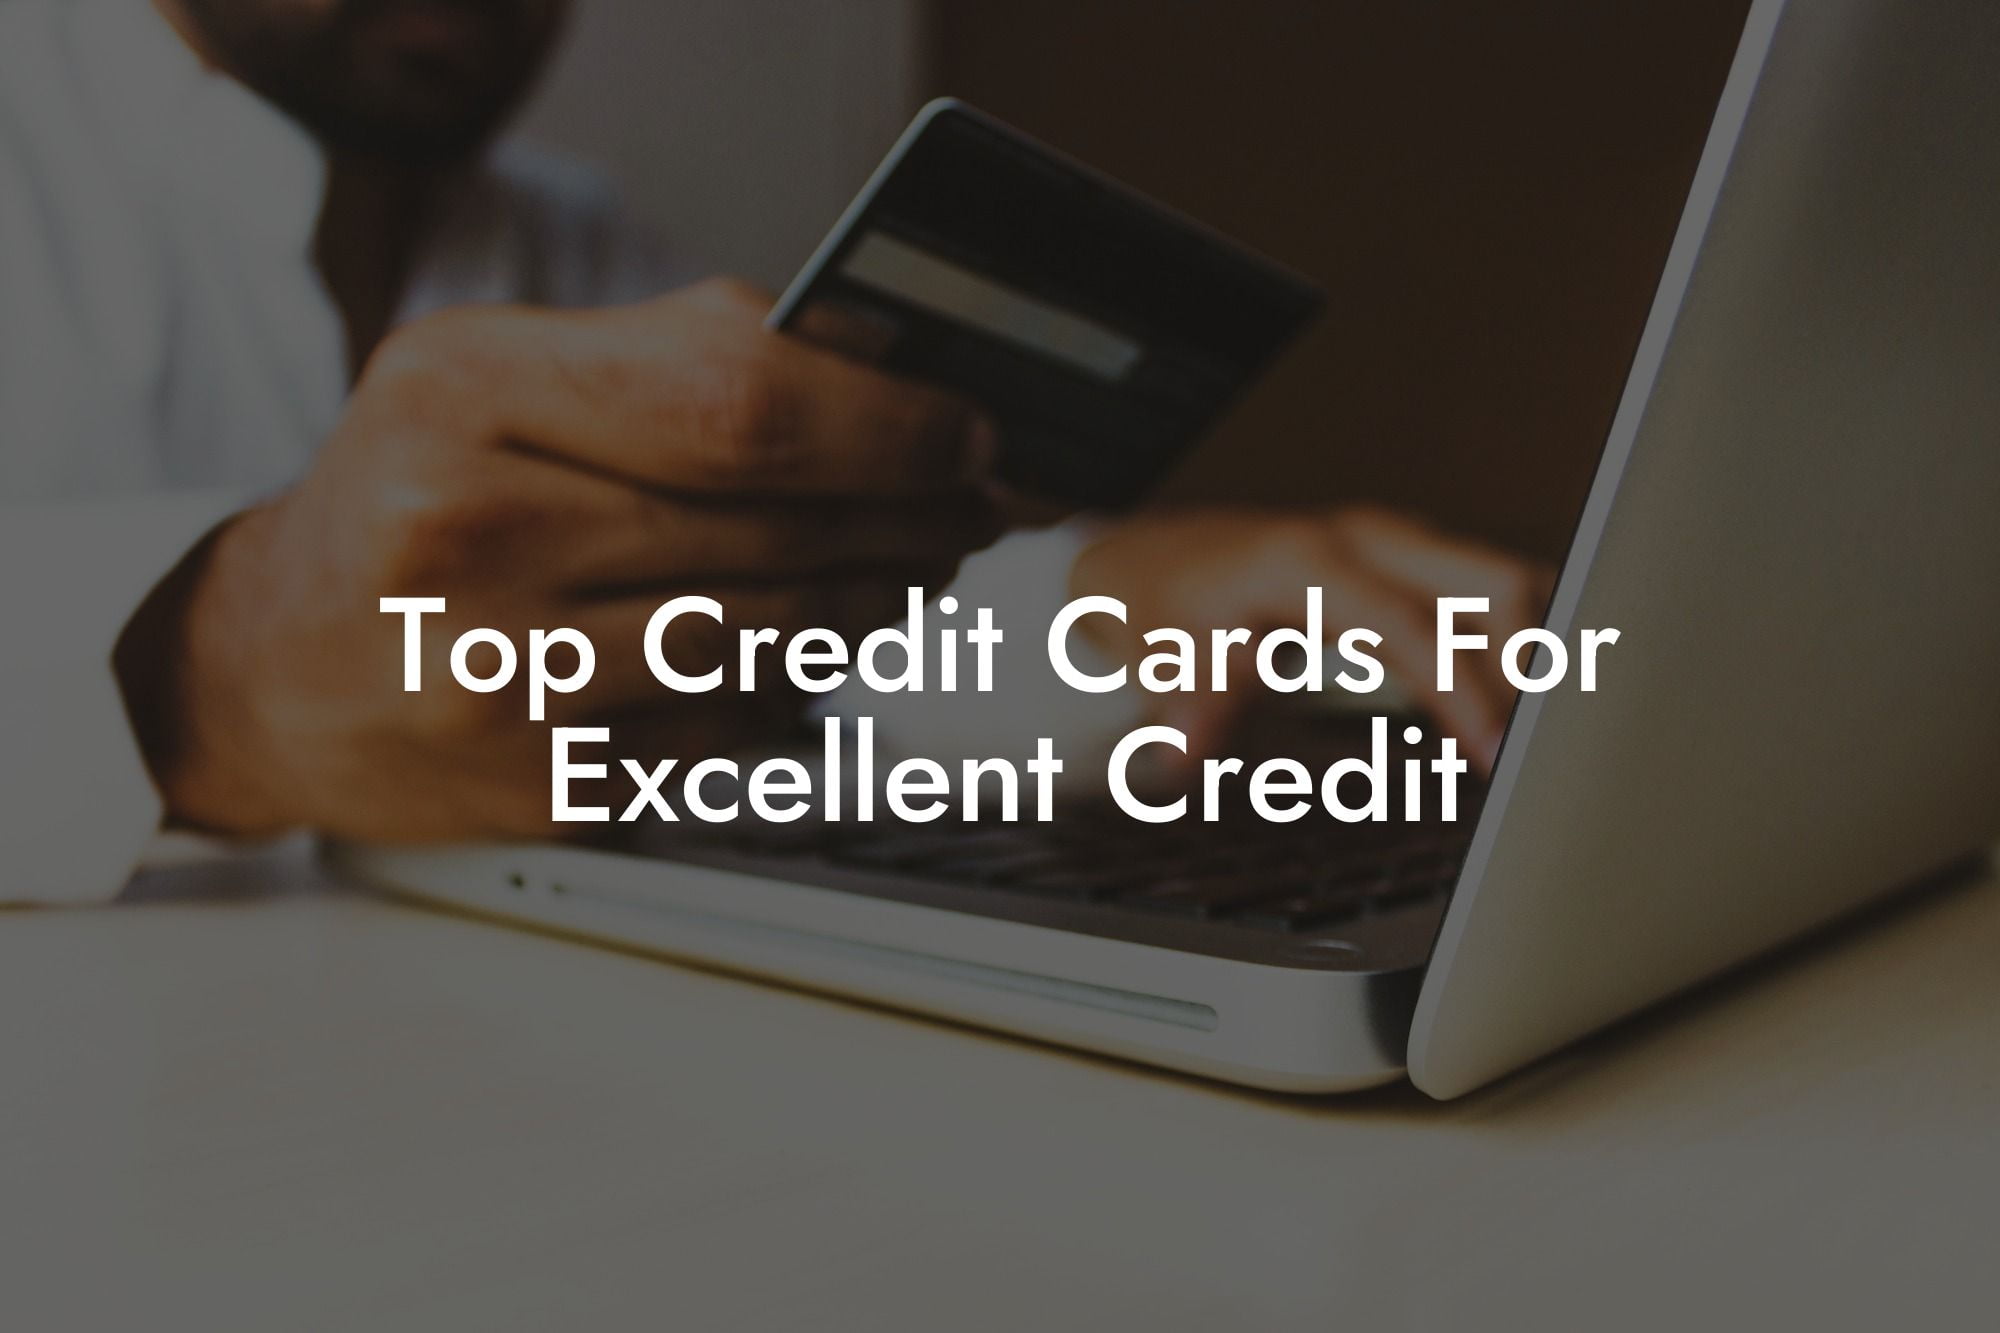 Top Credit Cards For Excellent Credit